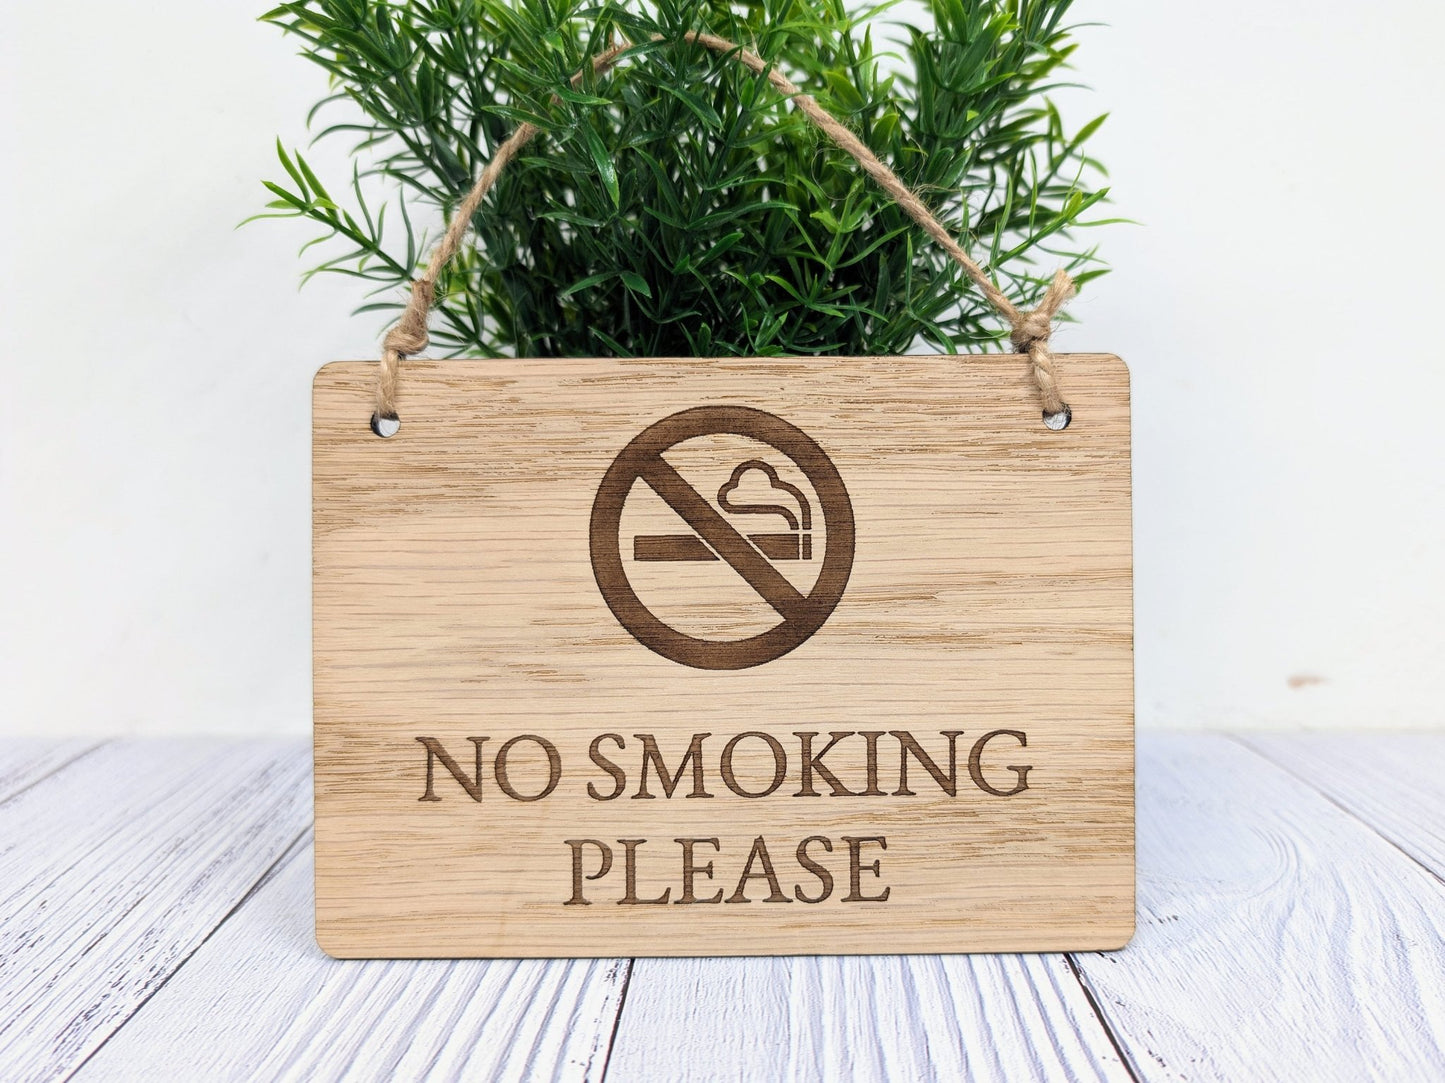 No Smoking Please, Wooden Sign | Oak Veneer | Wall Decor | Business Signage | Handcrafted in the UK - CherryGroveCraft